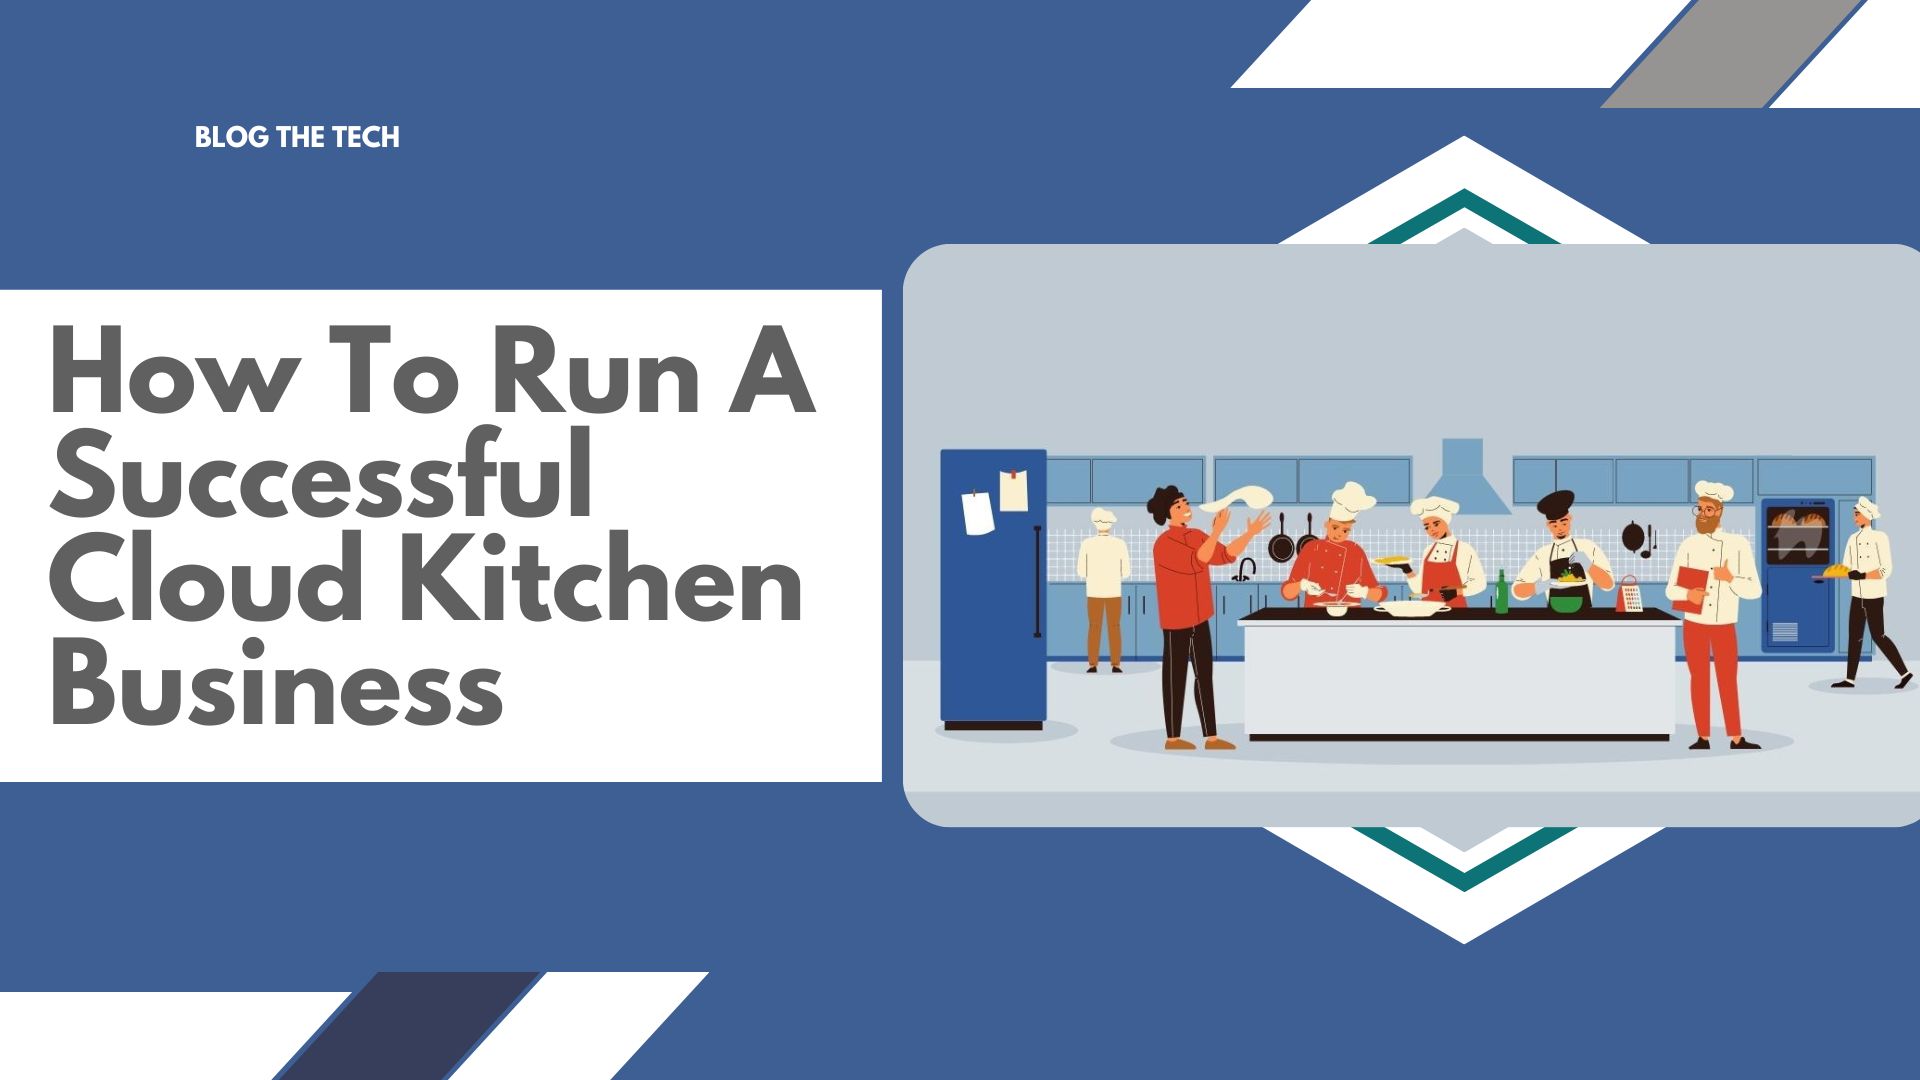 How To Run A Successful Cloud Kitchen Business